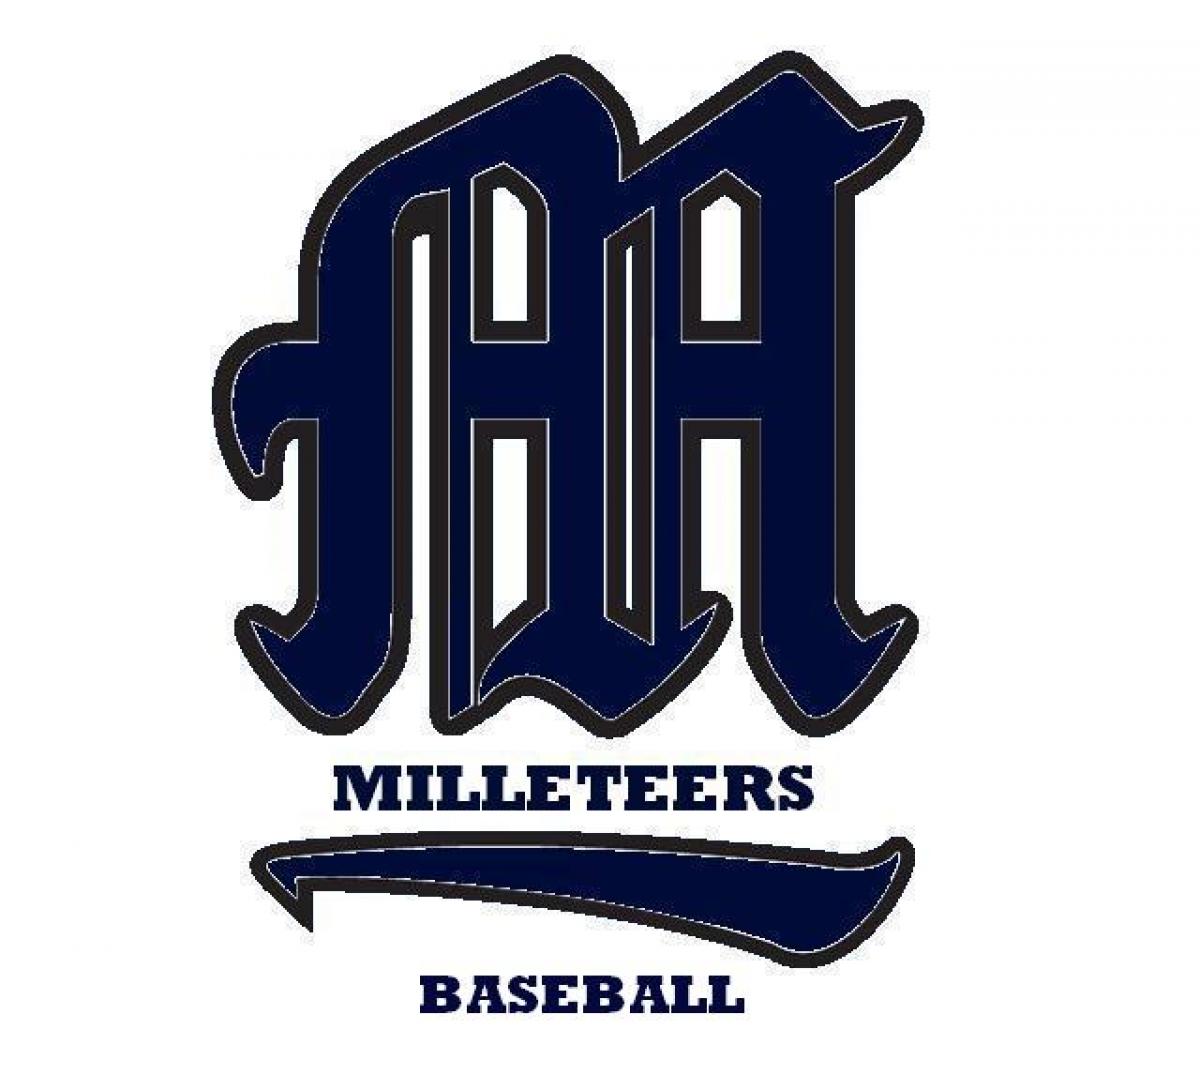 Milleteers Punch Their Ticket To The Final